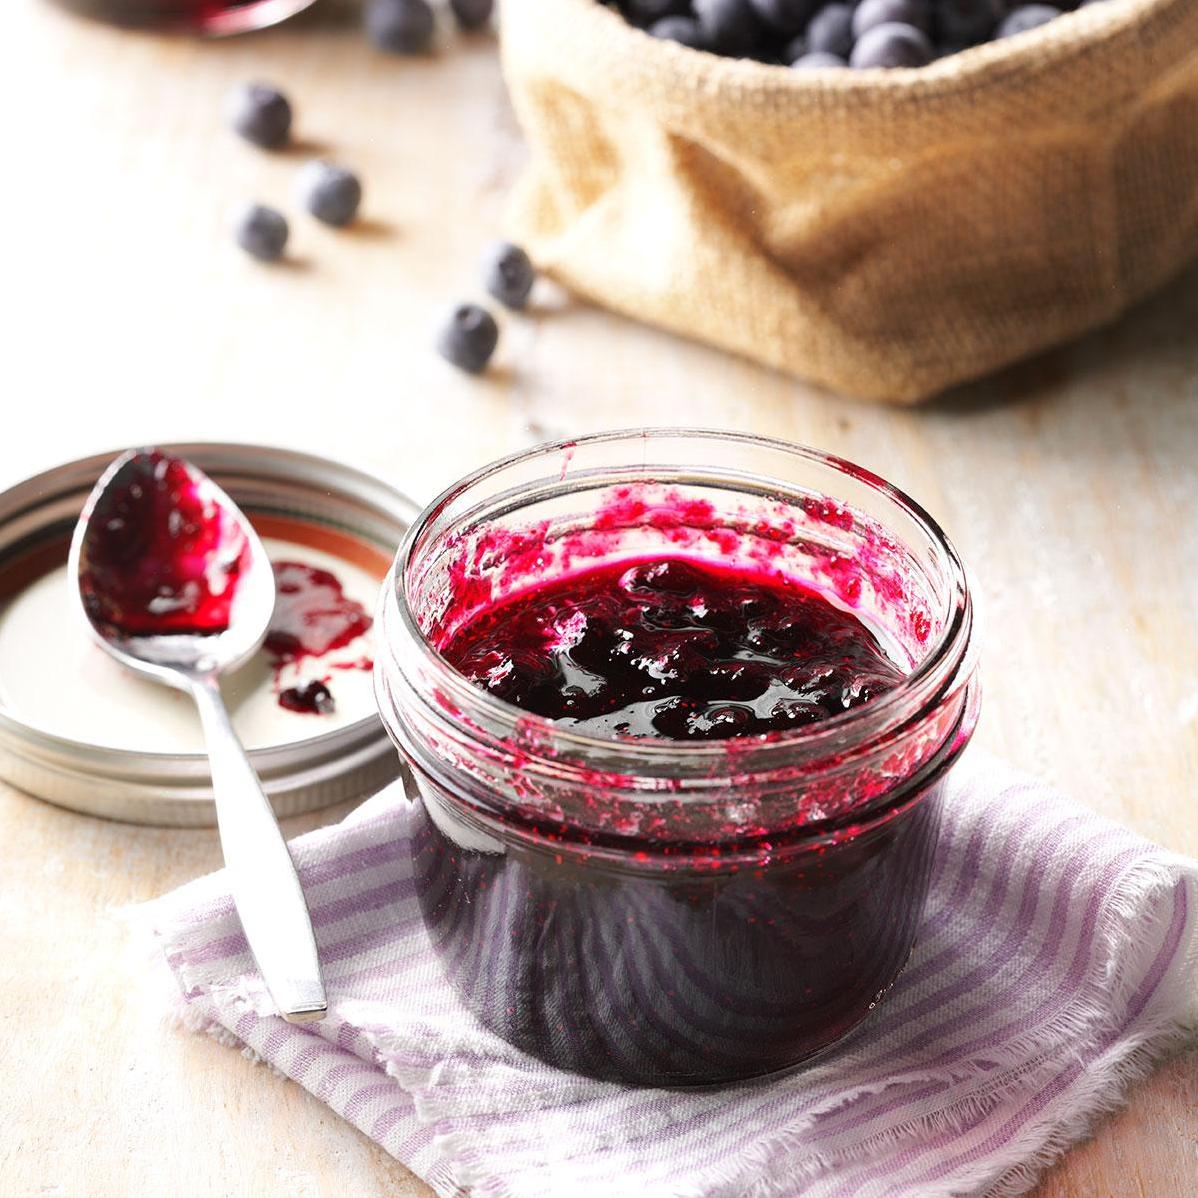  A jar of blueberry wine jam, a perfect gift for any wine lover!